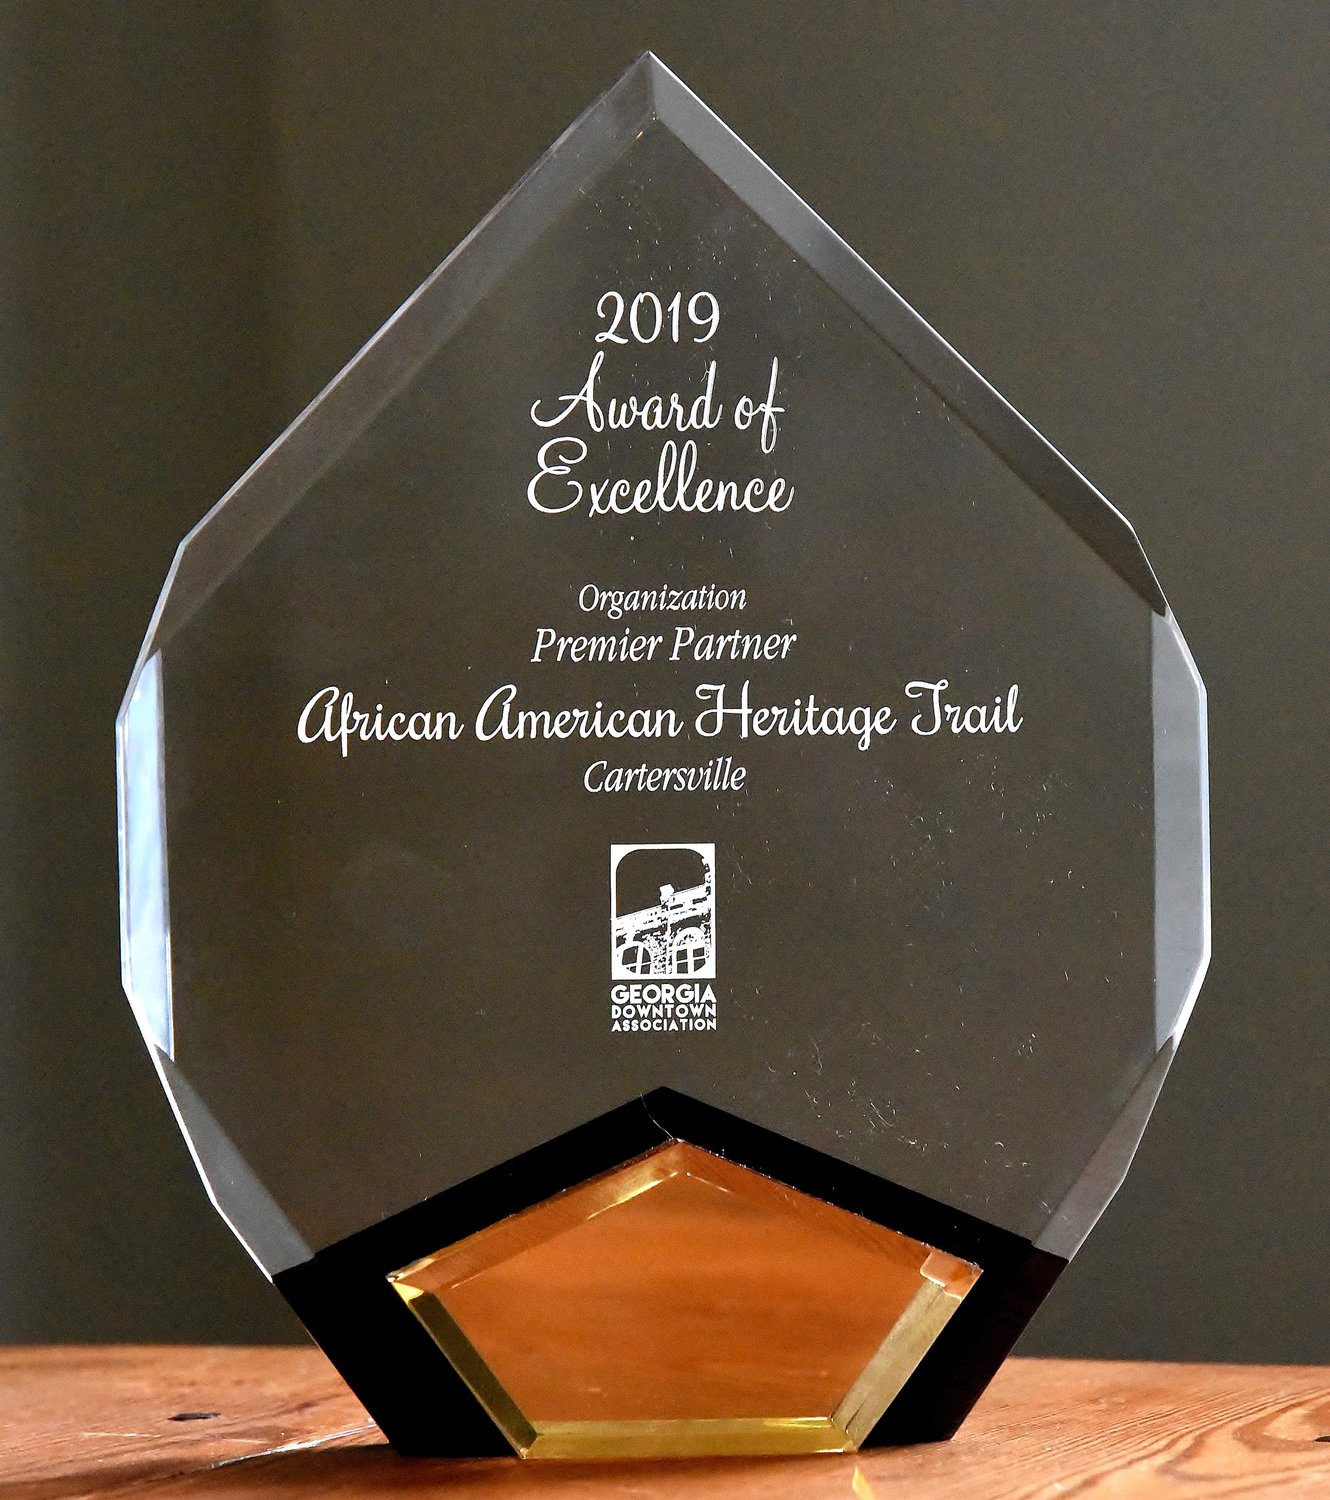 RANDY PARKER/THE DAILY TRIBUNE NEWS Bartow's African-American Heritage Trail won the 2019 Award of Excellence from the Georgia Downtown Association. Daily Tribune News